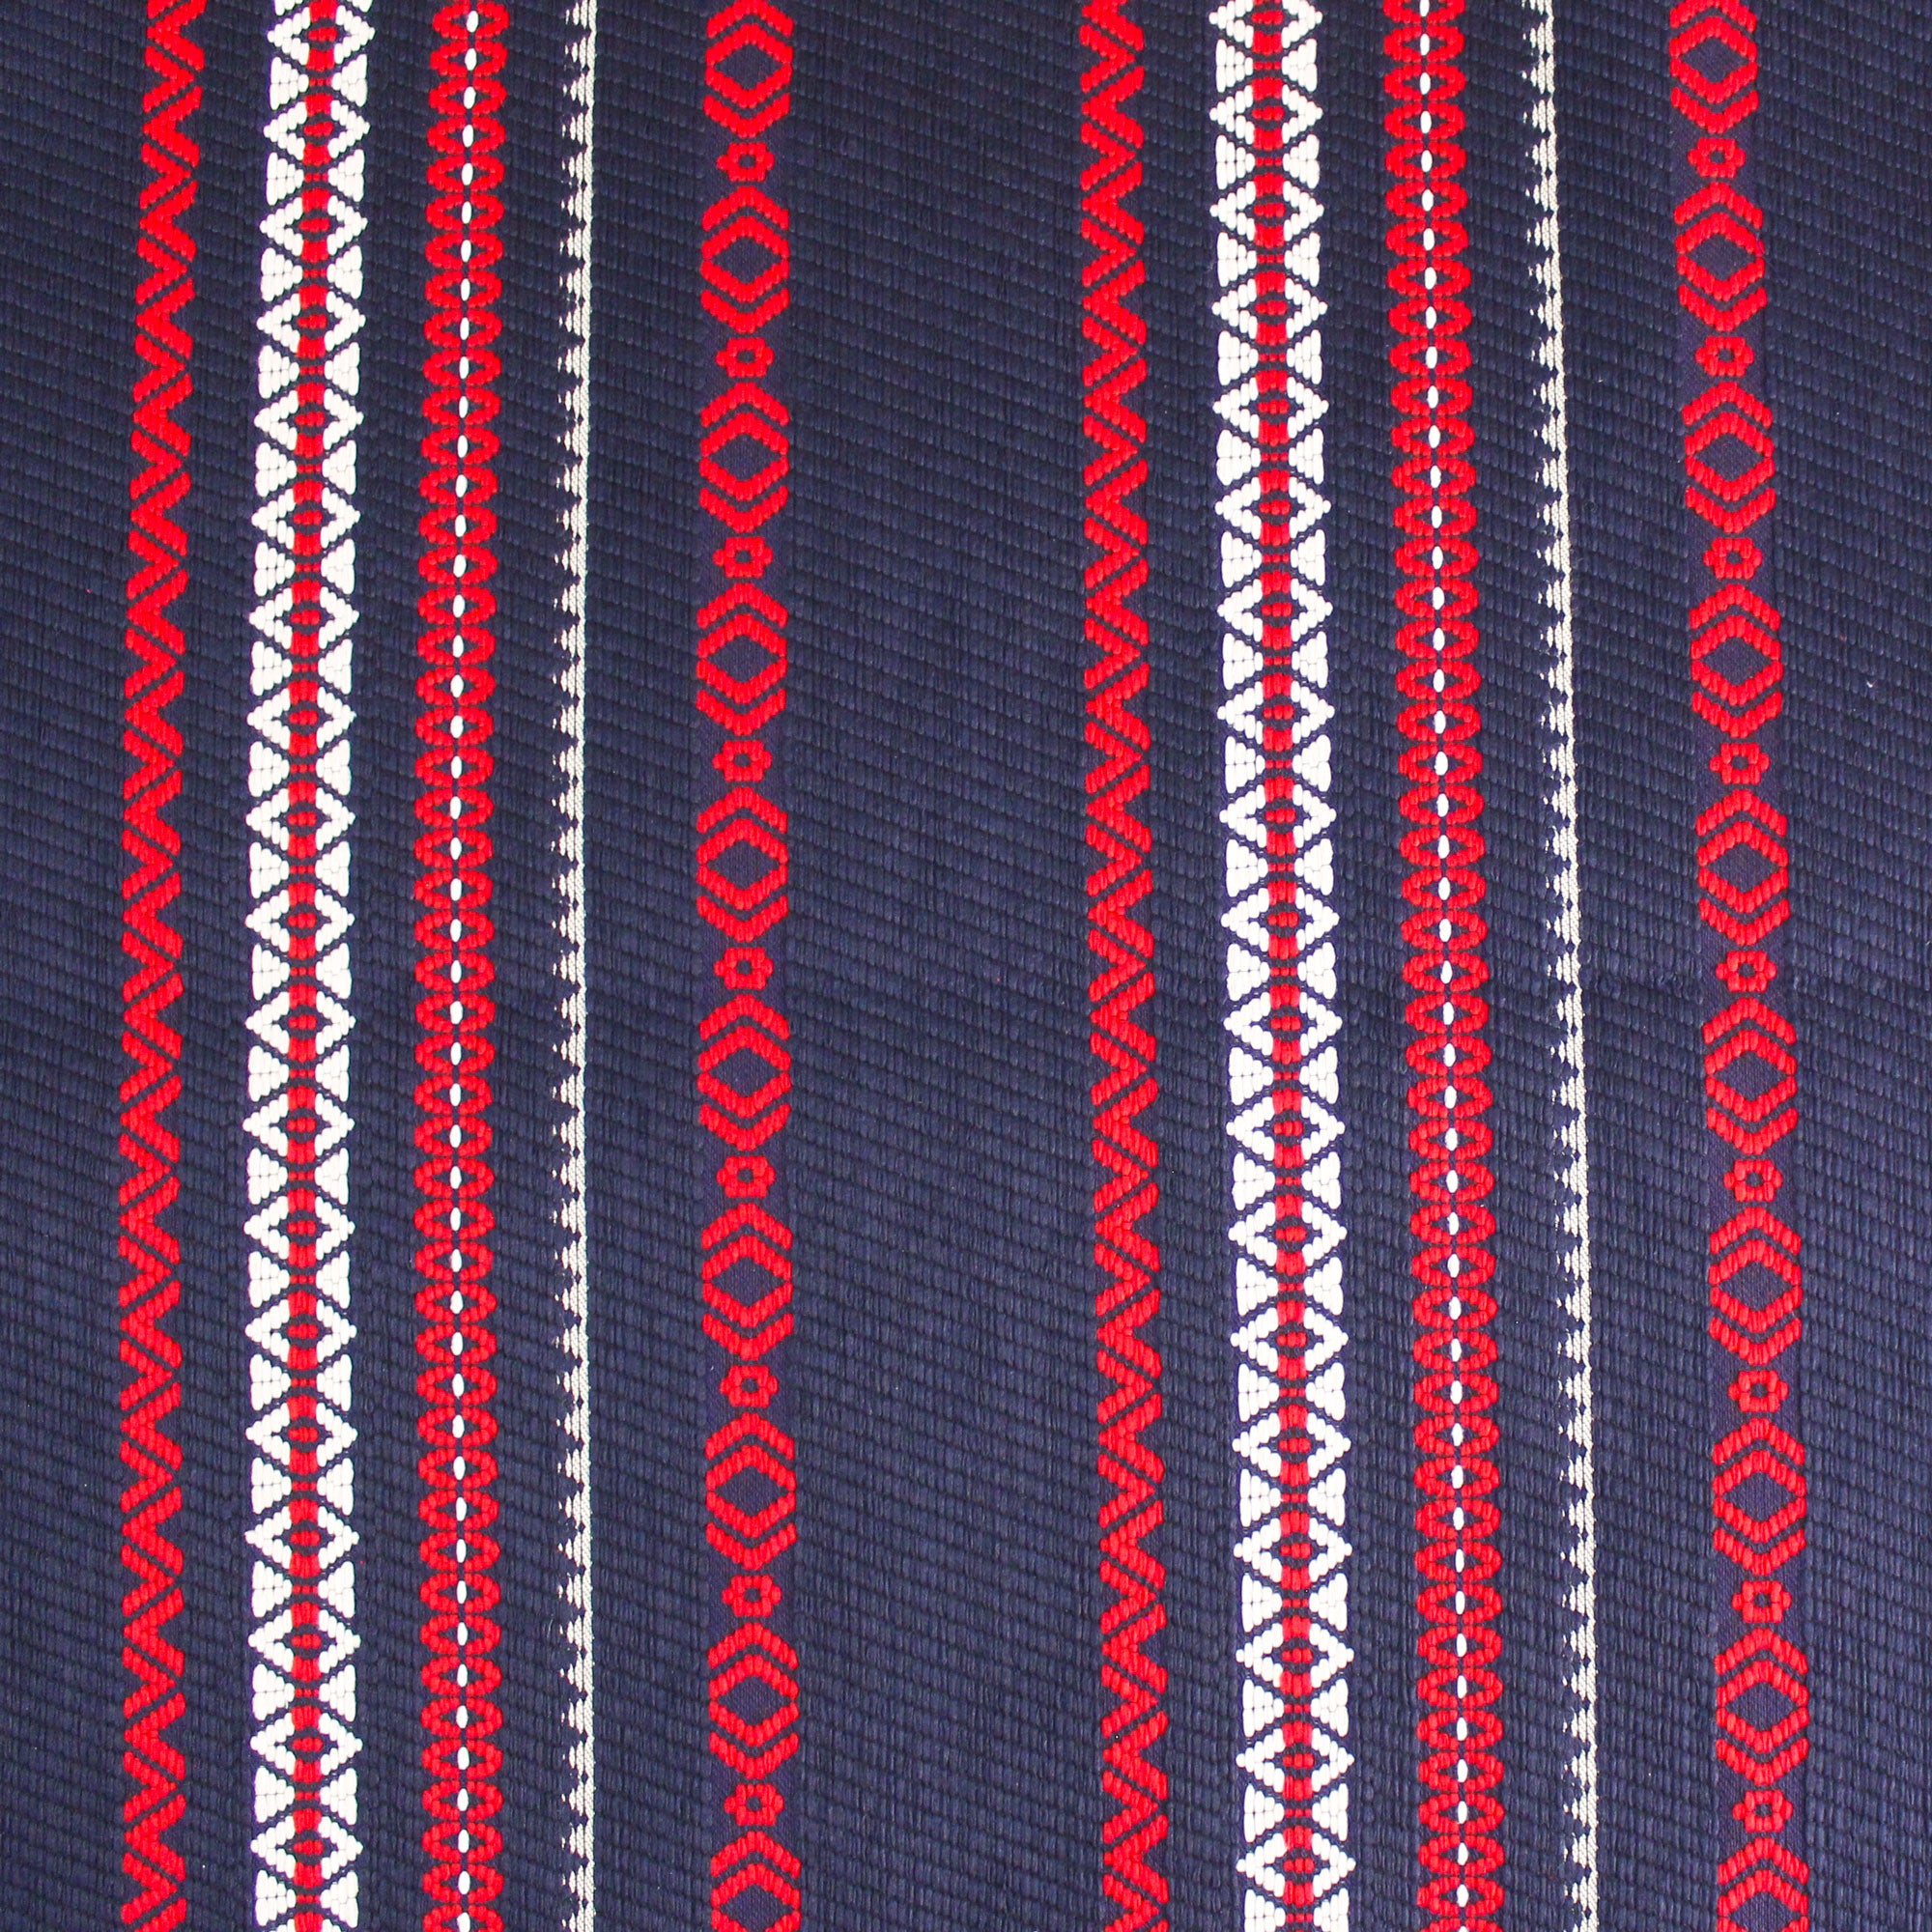 Cotton jacquard fabric with red and white graphic patterns